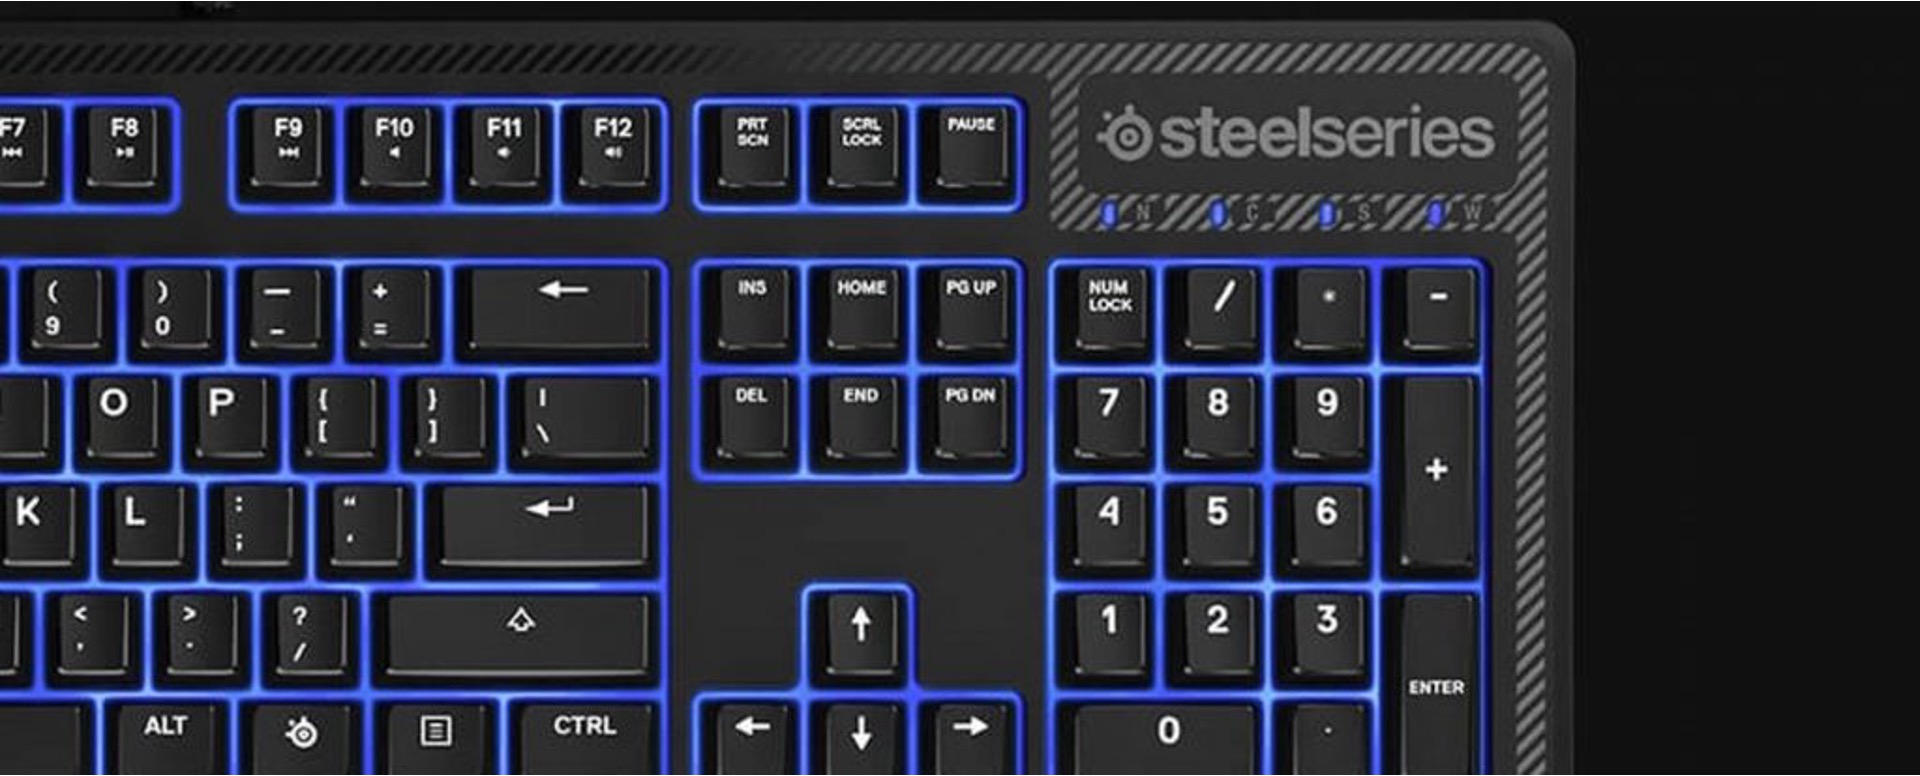 SteelSeries Apex 100 Gaming Keyboard: How To Change Color